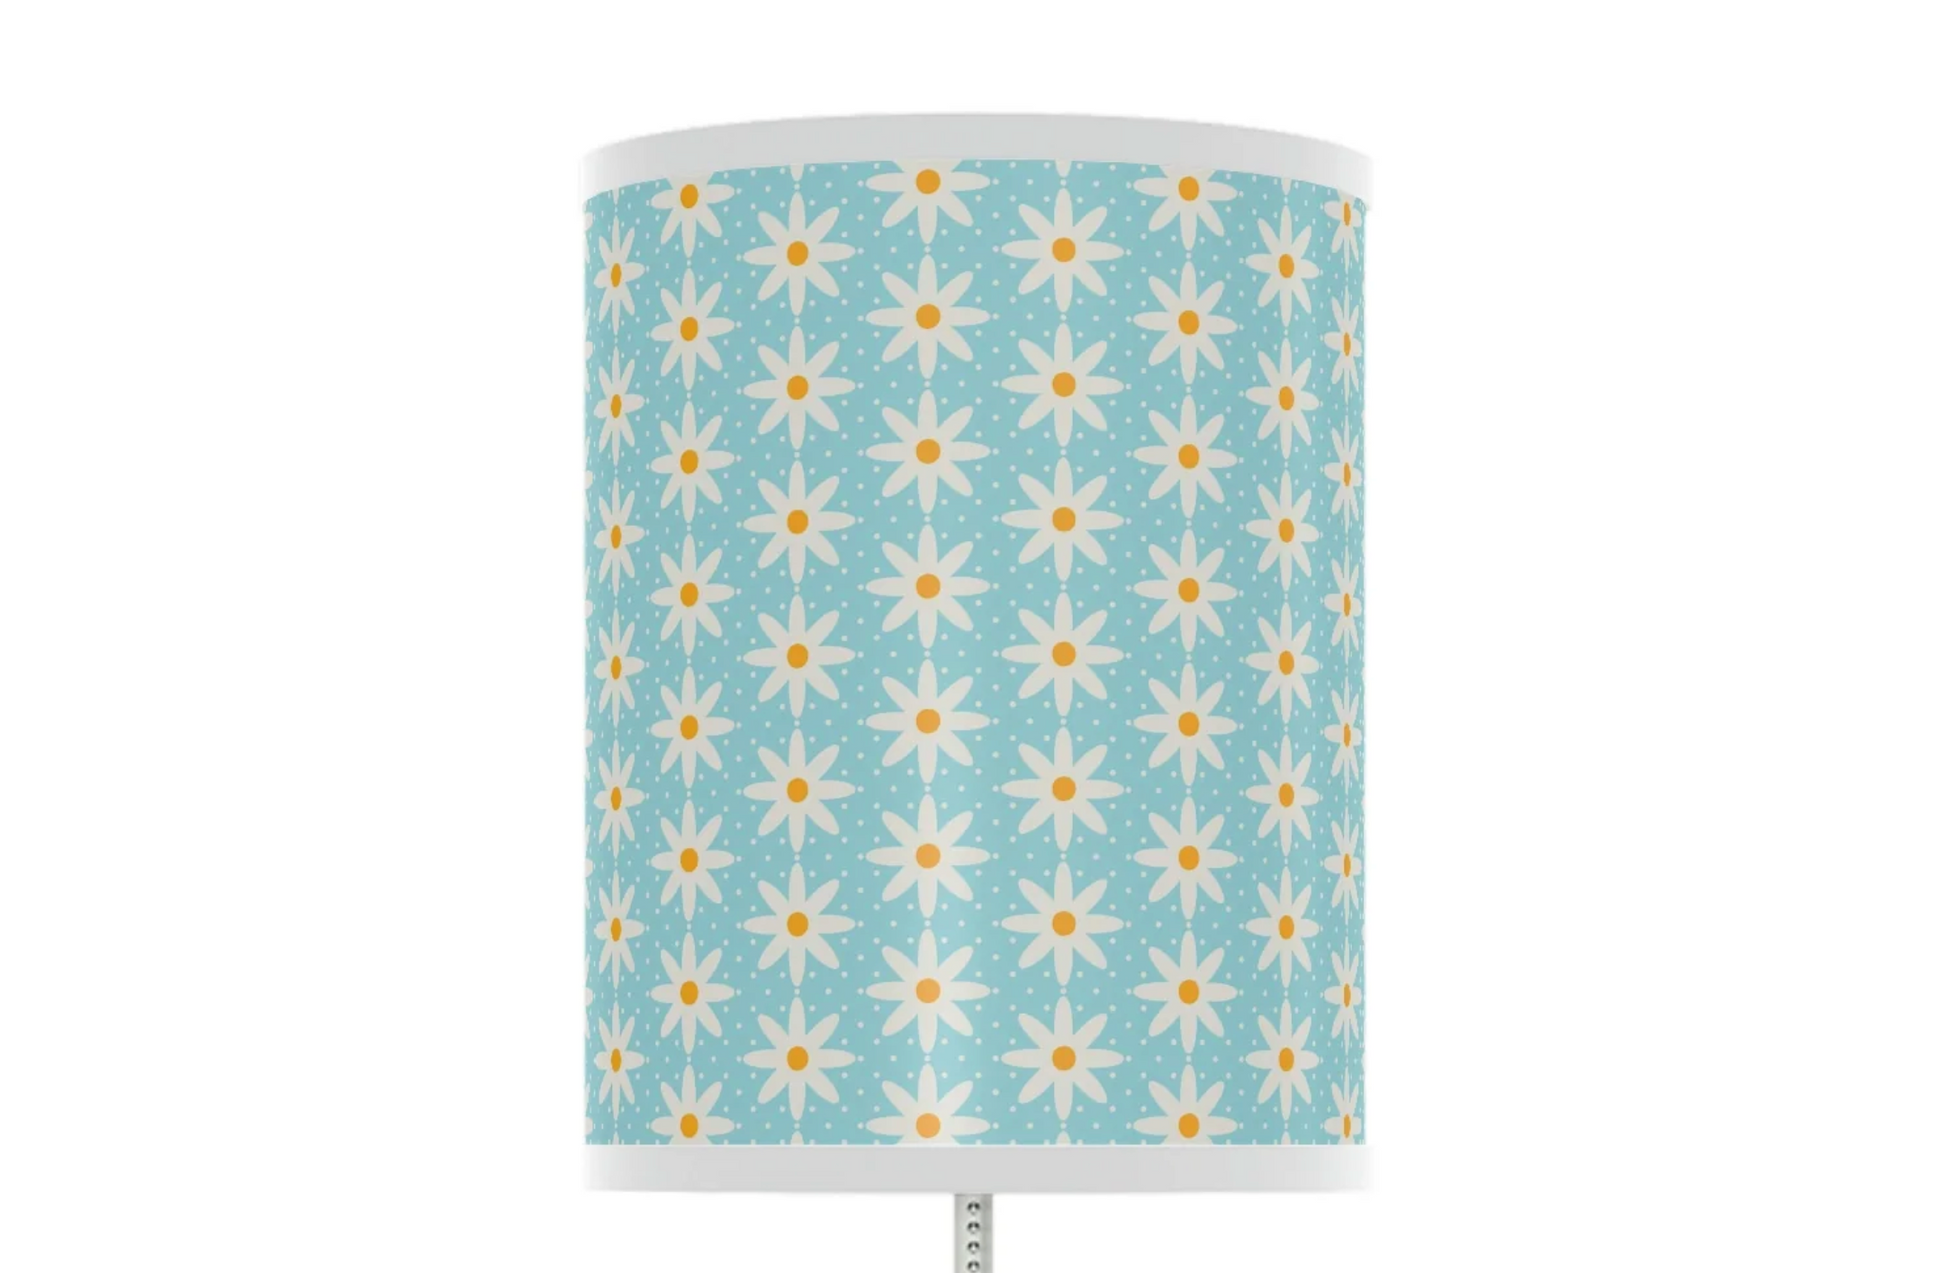 blue lamp with white floral pattern baby nursery lamp